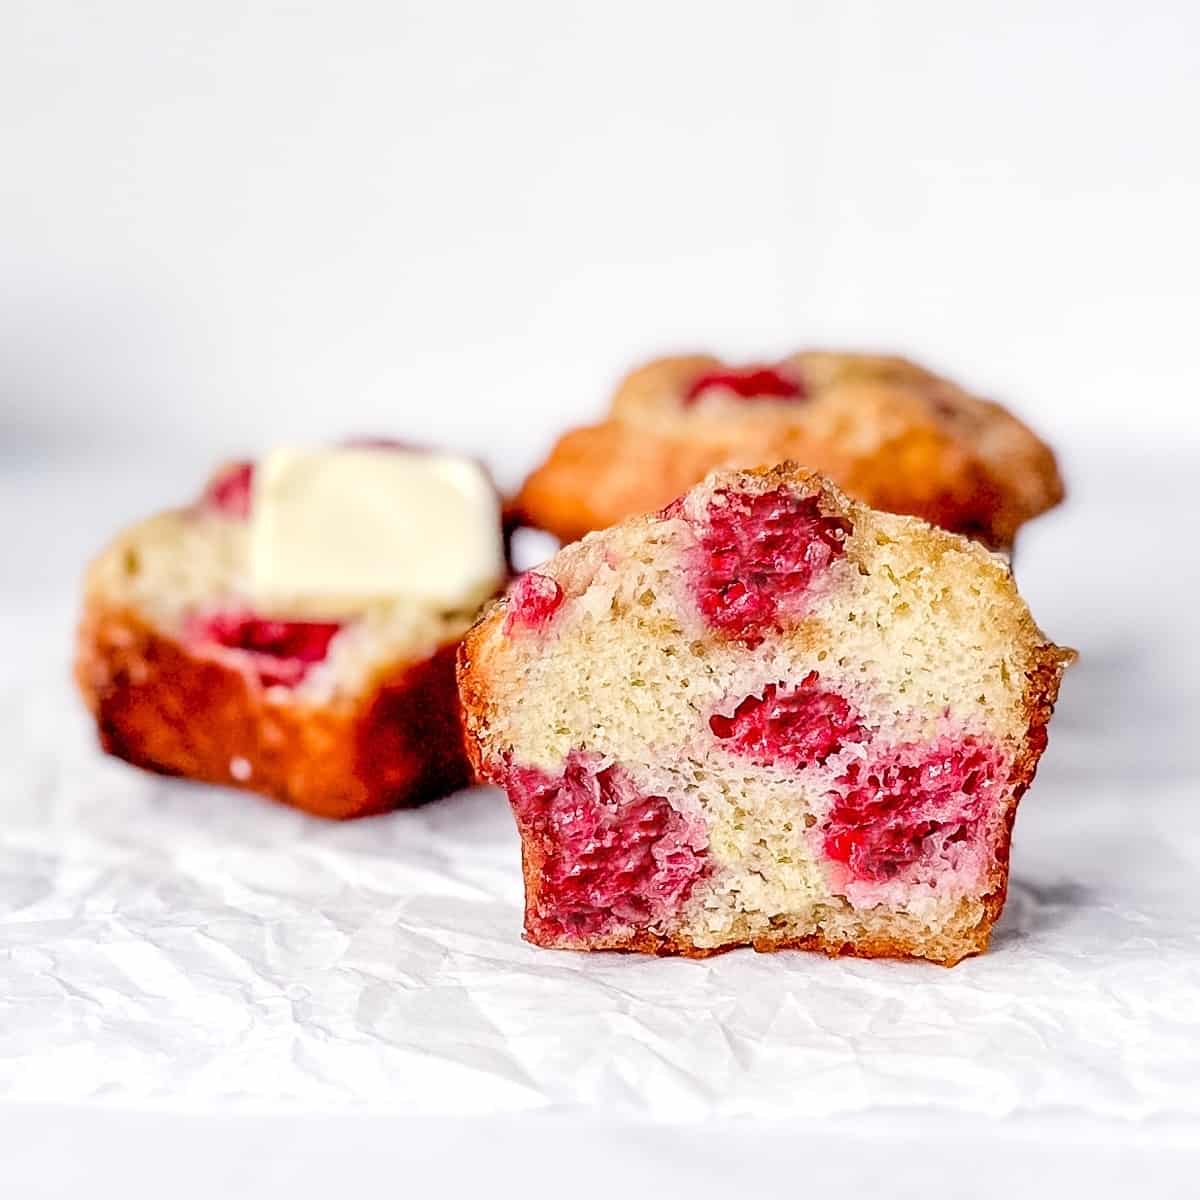 Front view of a sliced raspberry banana muffin with other muffins behind.